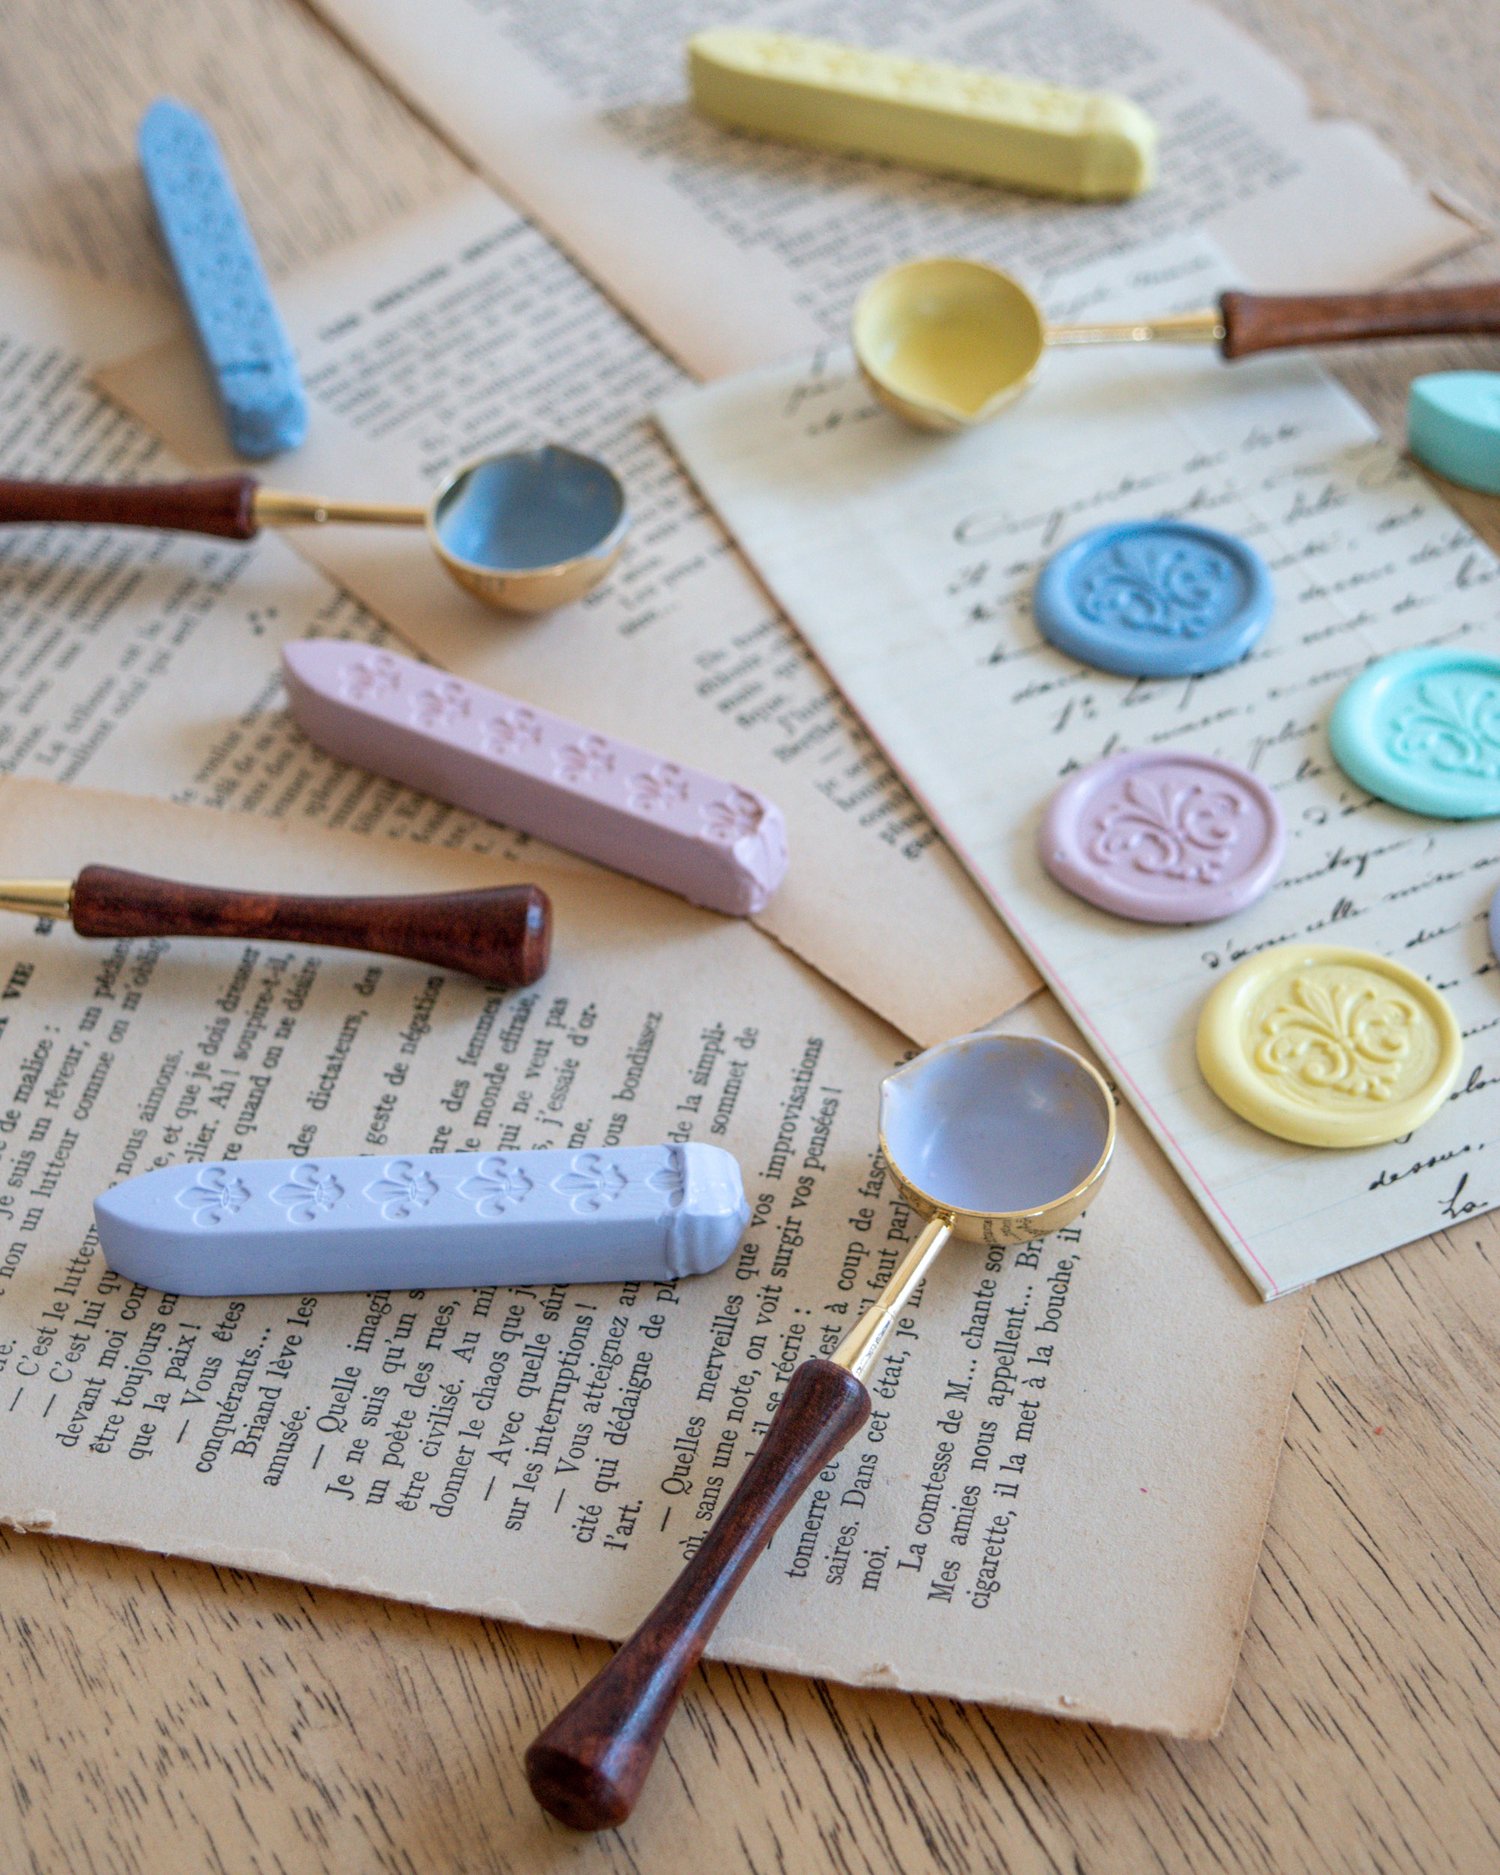 How to use Wax Sticks, Wax Sealing Tips, Pastel Color Wax Seals